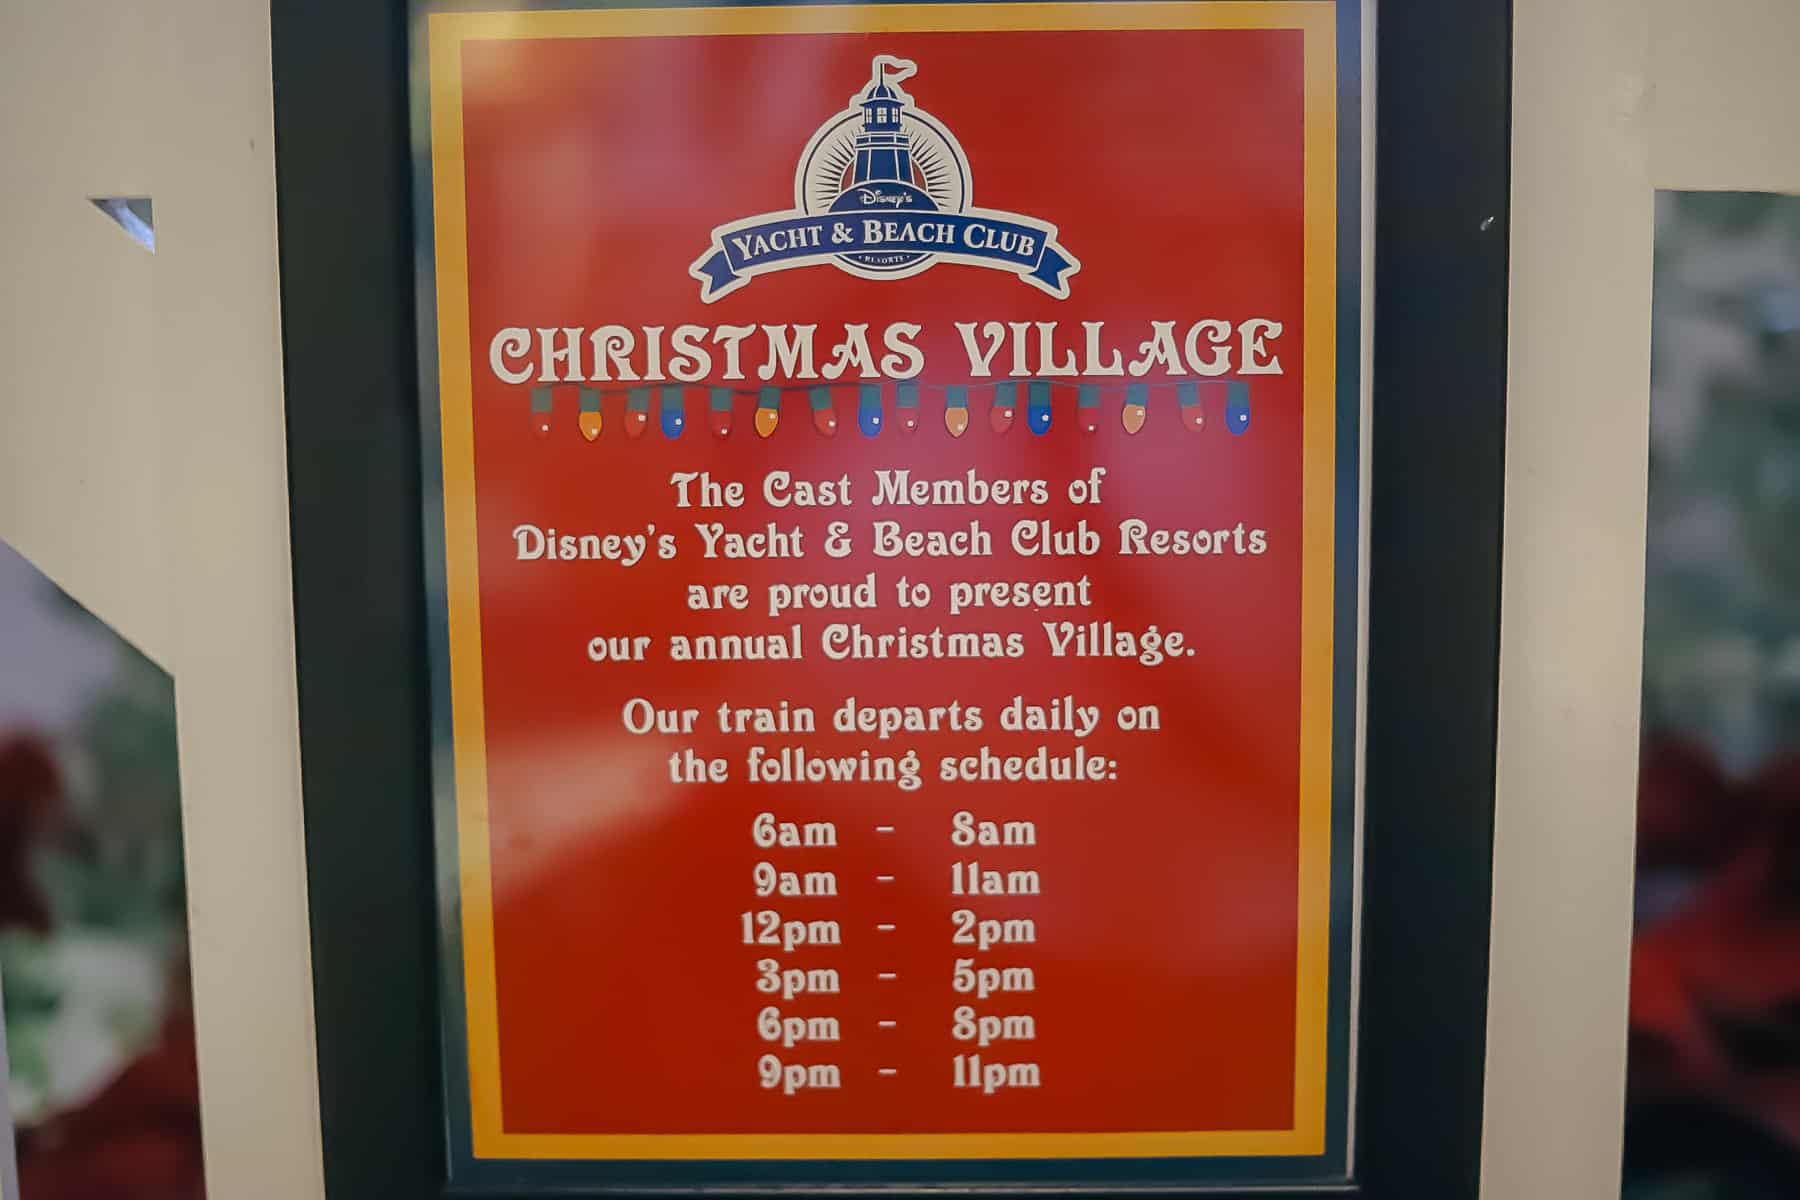 A sign that lists the time when the train at Disney's Yacht Club departs.